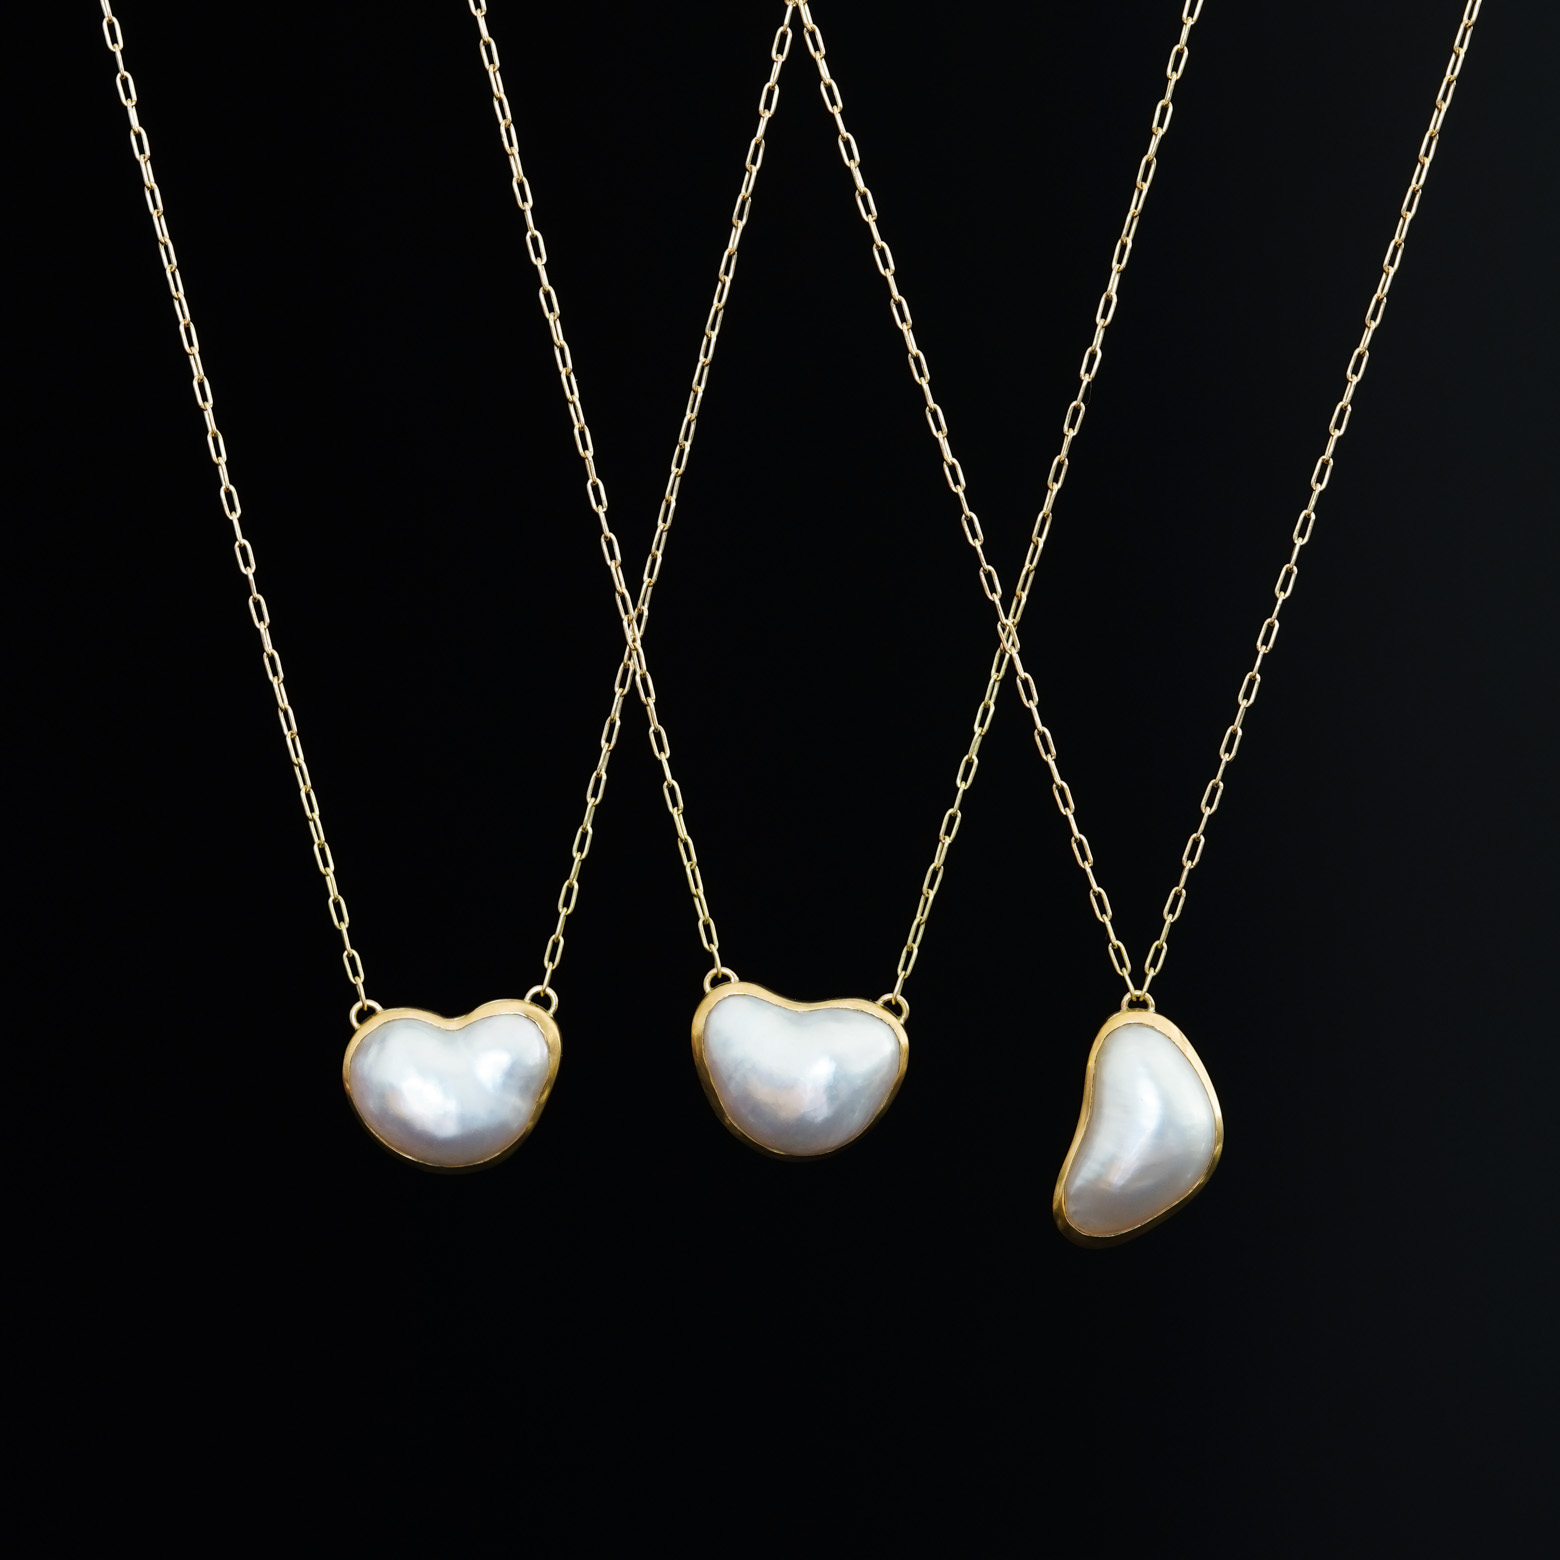 Half Keshi Pearl Necklace (SOURCE) - SOURCE objects